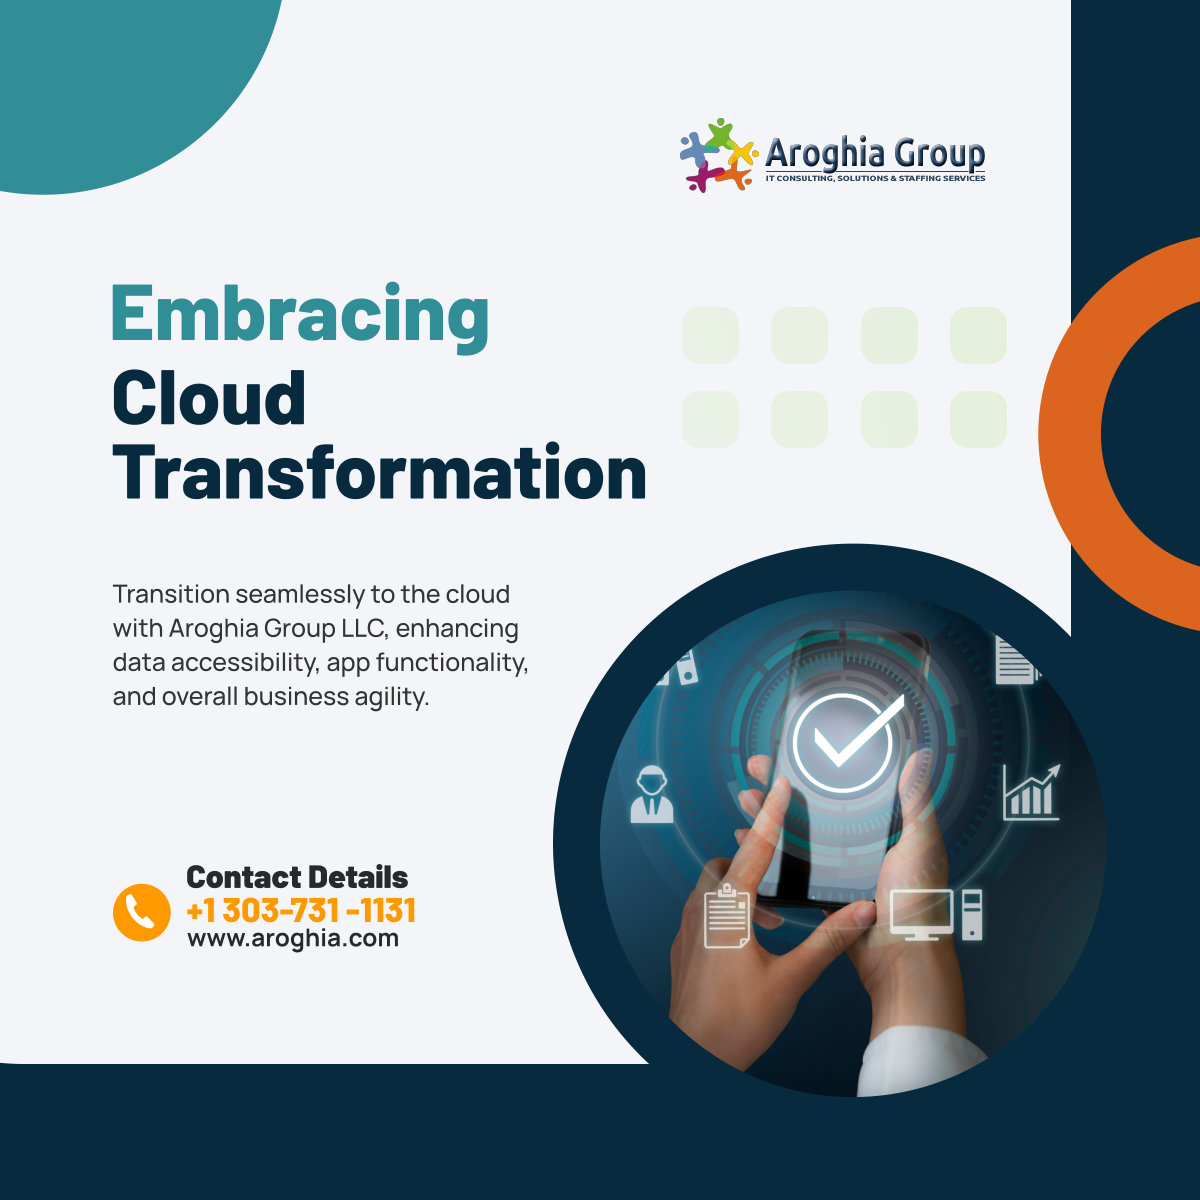 Future-proof your business with Aroghia Group LLC cloud transformation services. Elevate your data and application management to the cloud for unparalleled flexibility and efficiency.

#AuroraCO #ITServices #CloudTransformation #BusinessAgility #TechInnovation